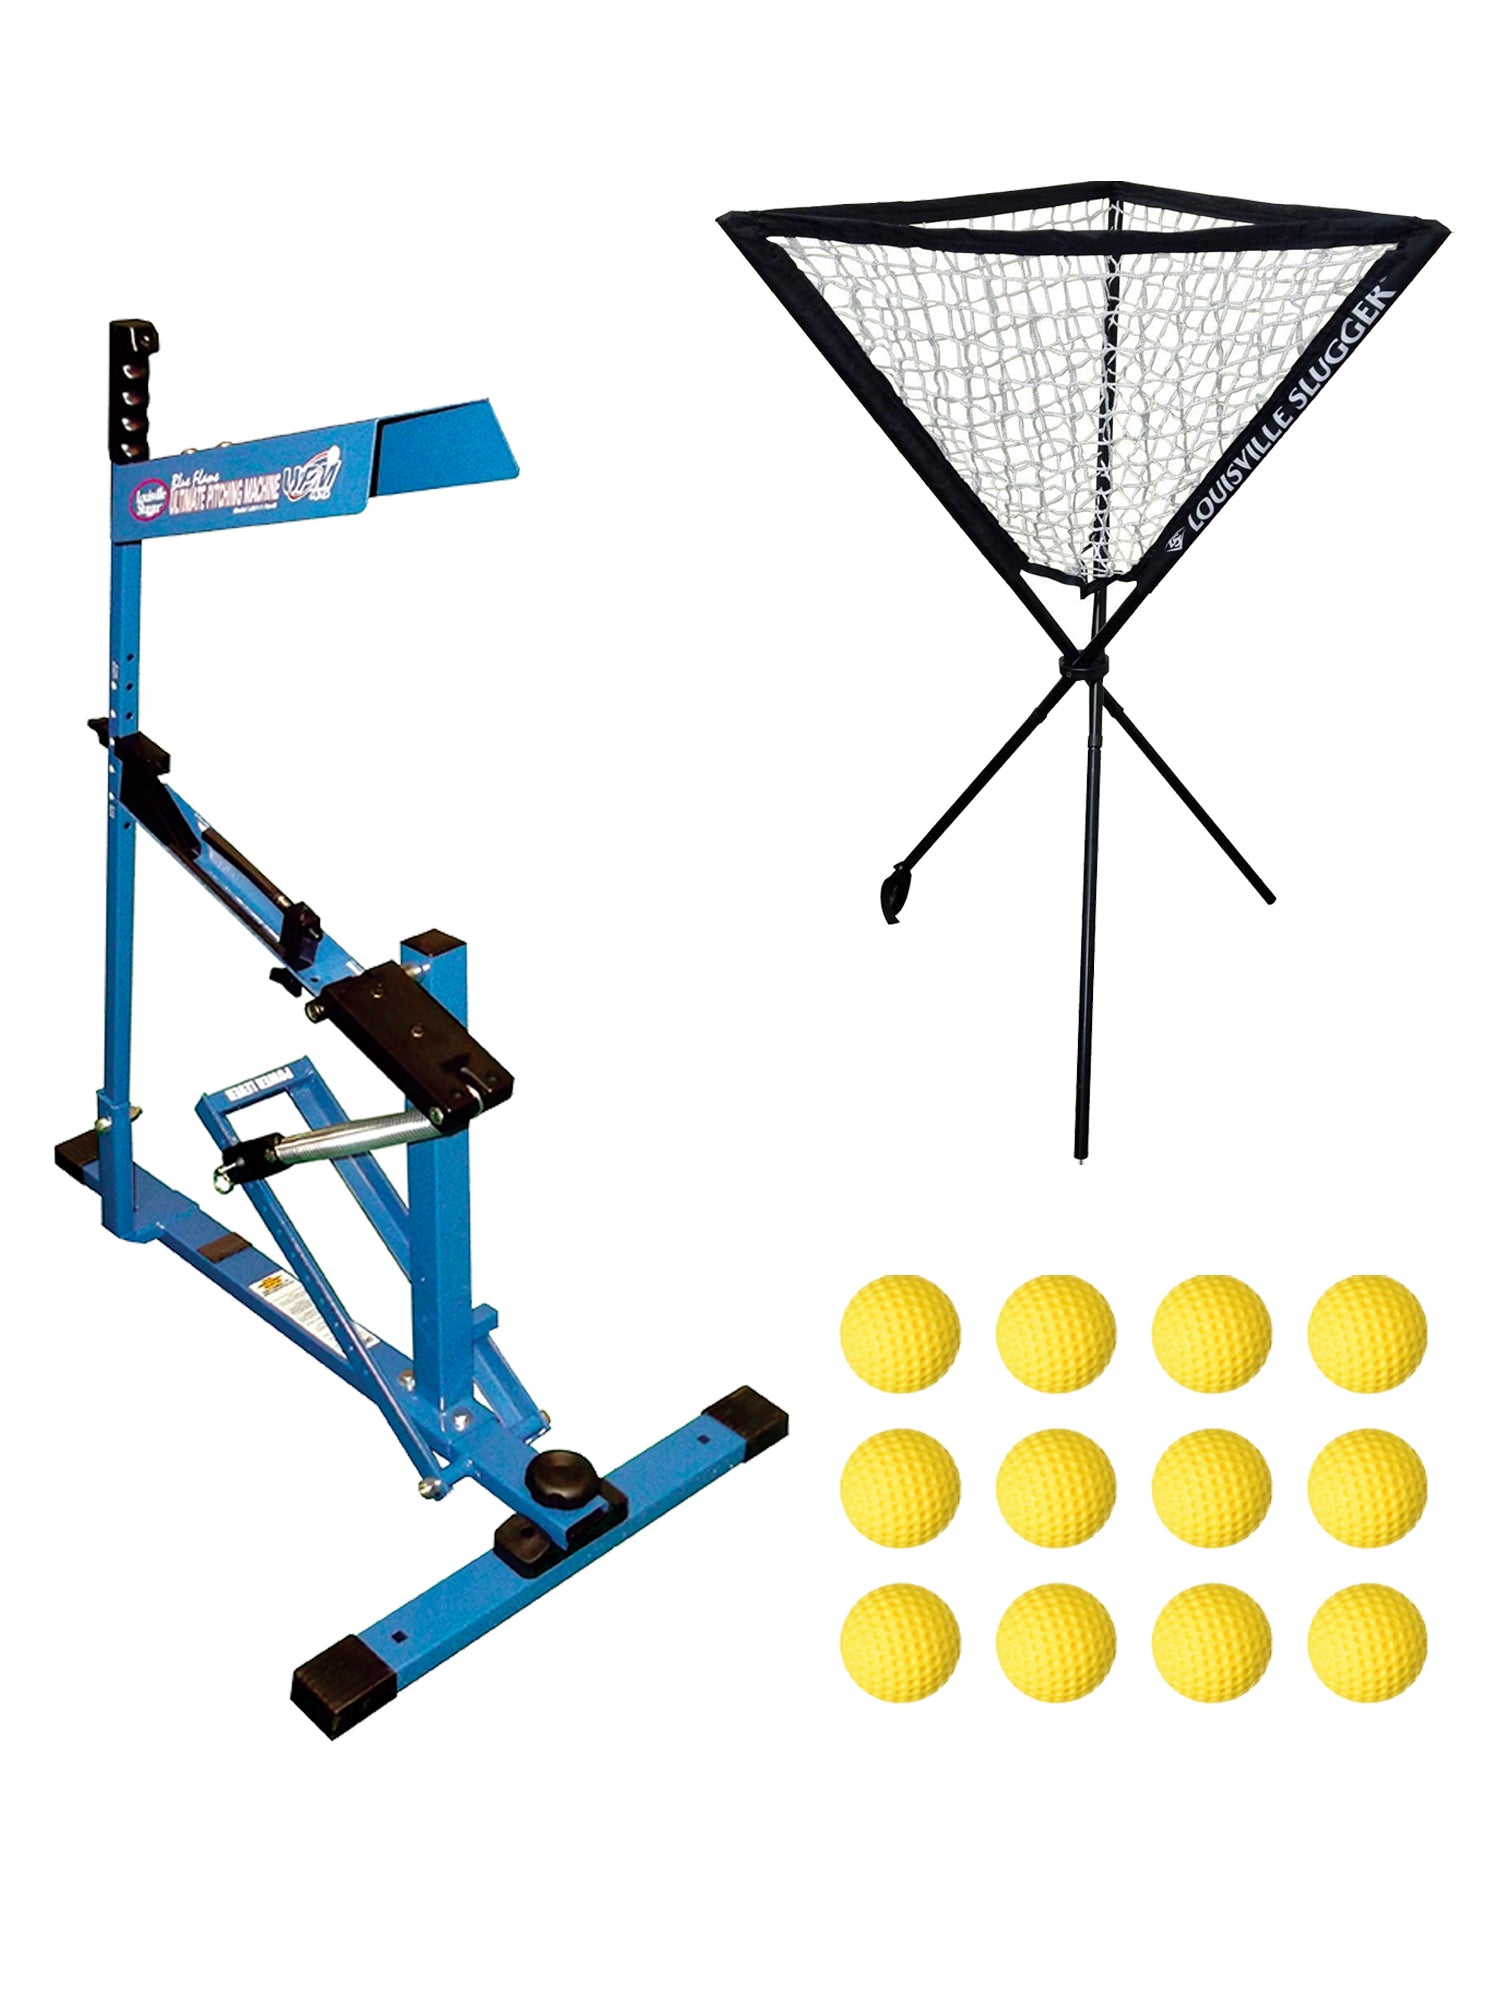 Louisville Slugger UPM 45 Pitching Machine - REAL REVIEW